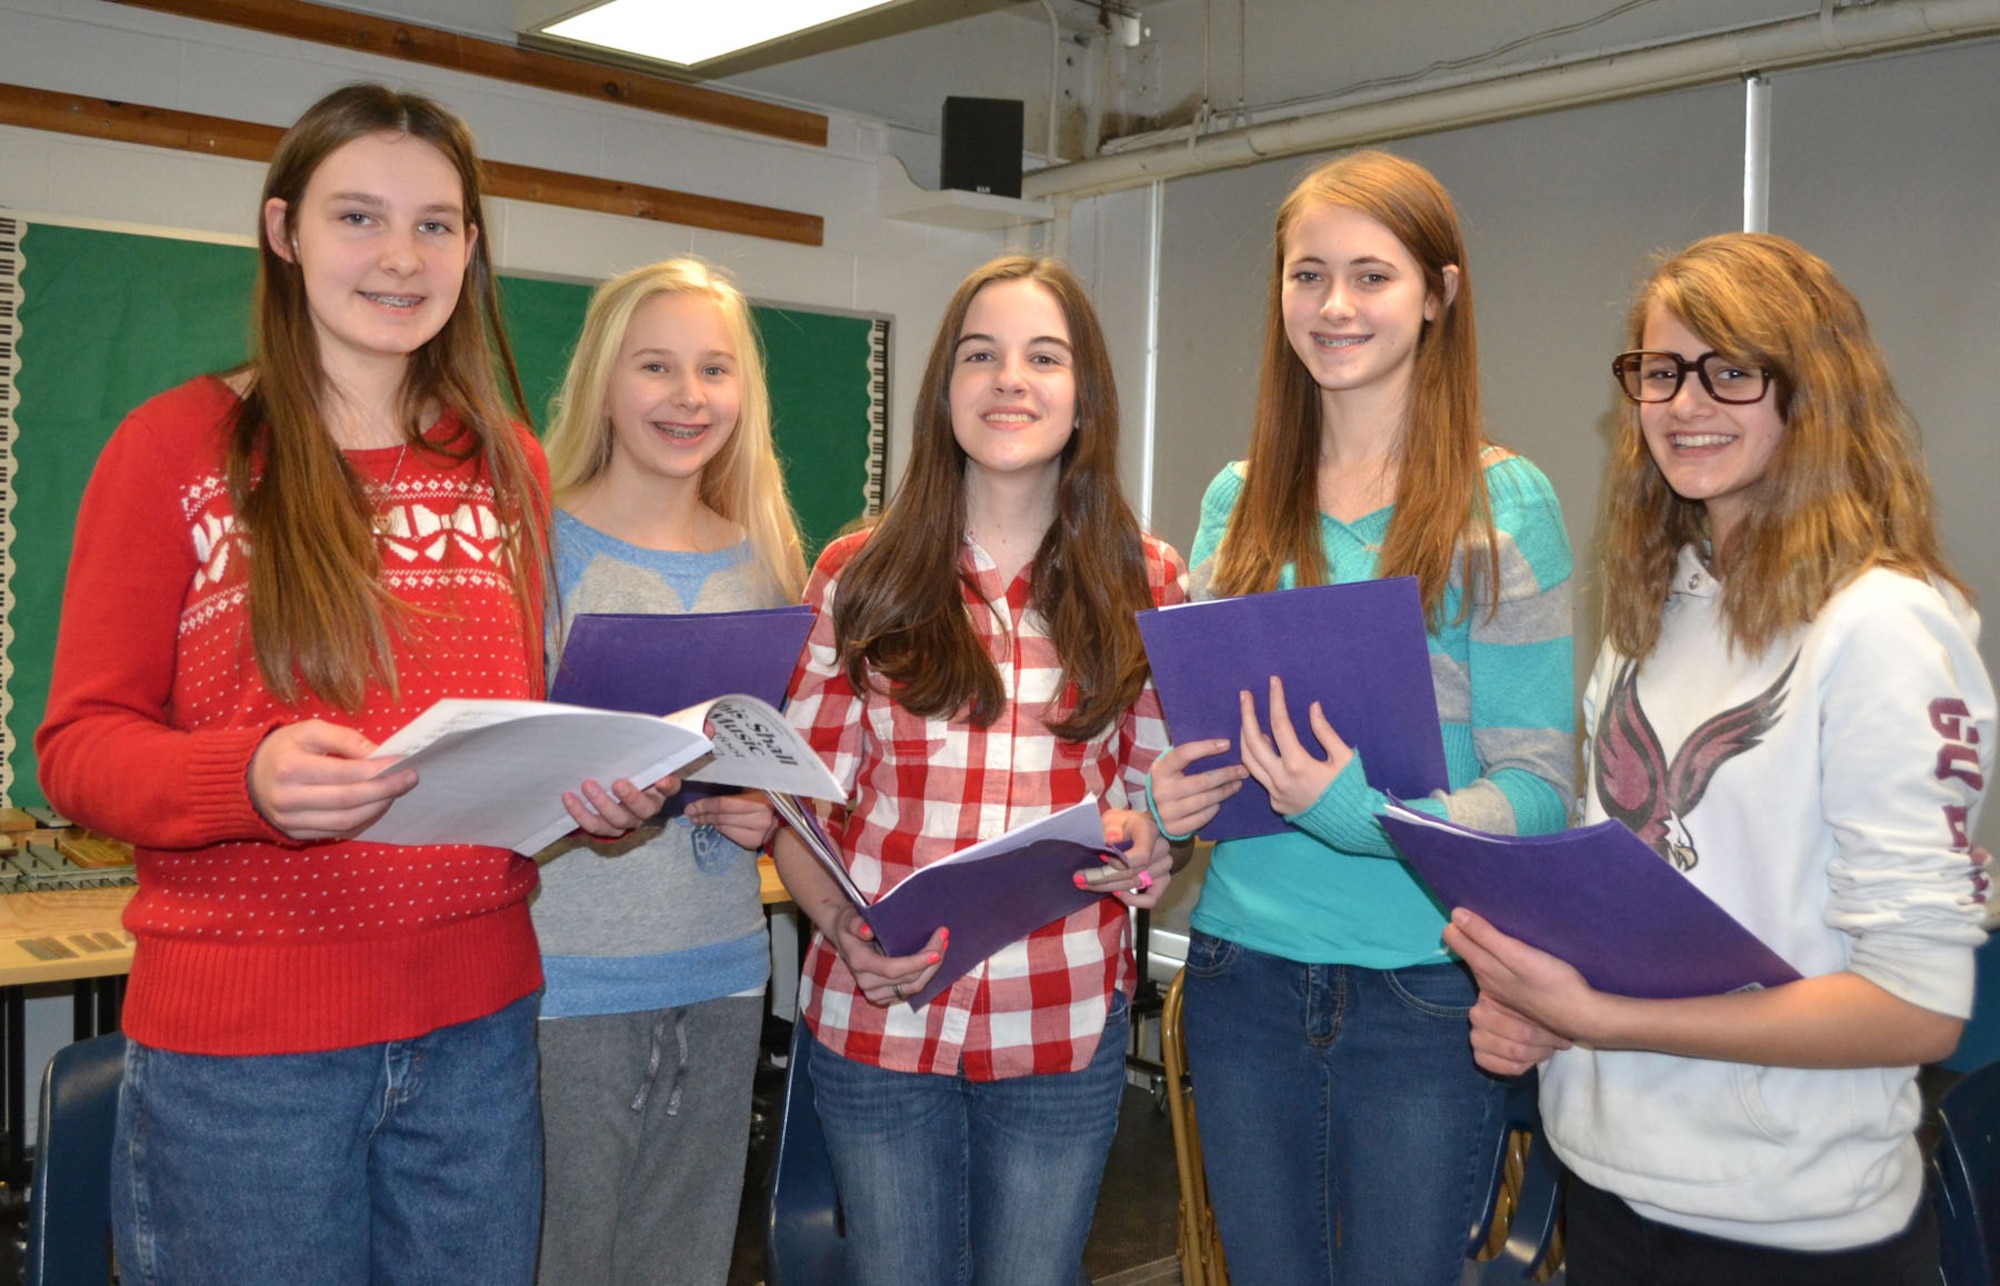 HANSCOM AIR FORCE BASE, Mass. – (left to right) Taylor Campbell, Emily McSwain, Katelyn Miller, Julianna Byington and Rebecca McIllece practice singing during a recent rehearsal at Hanscom Middle School. The five students were selected to participate in the Massachusetts Music Educators Association Eastern District Junior Festival on March 8 and 9. During auditions in January, 1,026 students from eastern Massachusetts performed. Of those, 476 were chosen for the festival. Byington and Campbell will sing with the Treble Chorus and McIllece, McSwain and Miller will sing with the Mixed Chorus. (Courtesy photo)